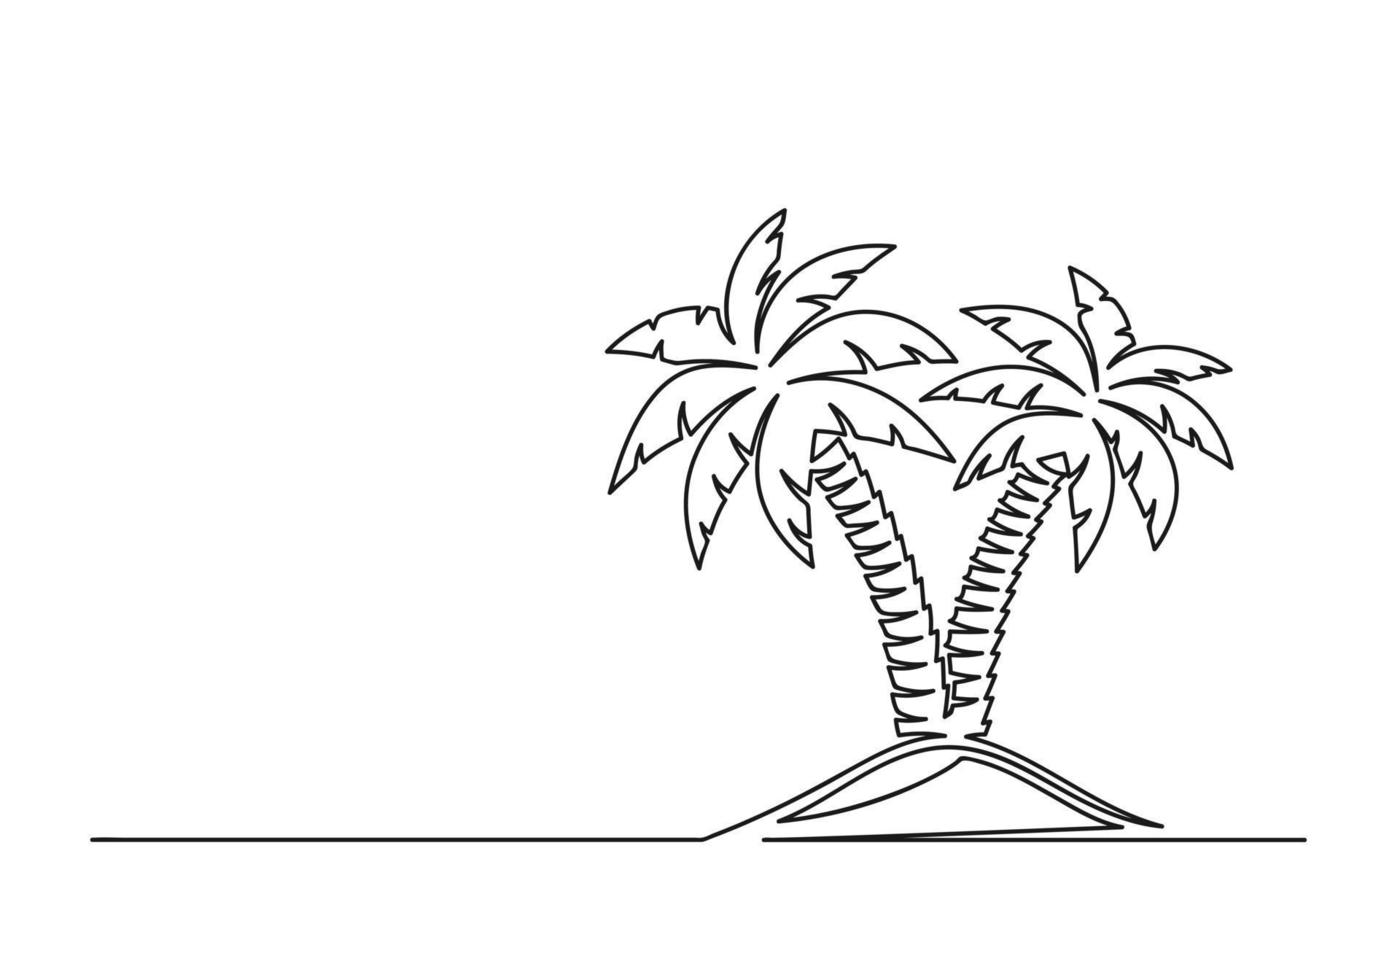 Continuous one line drawing of palm trees vector